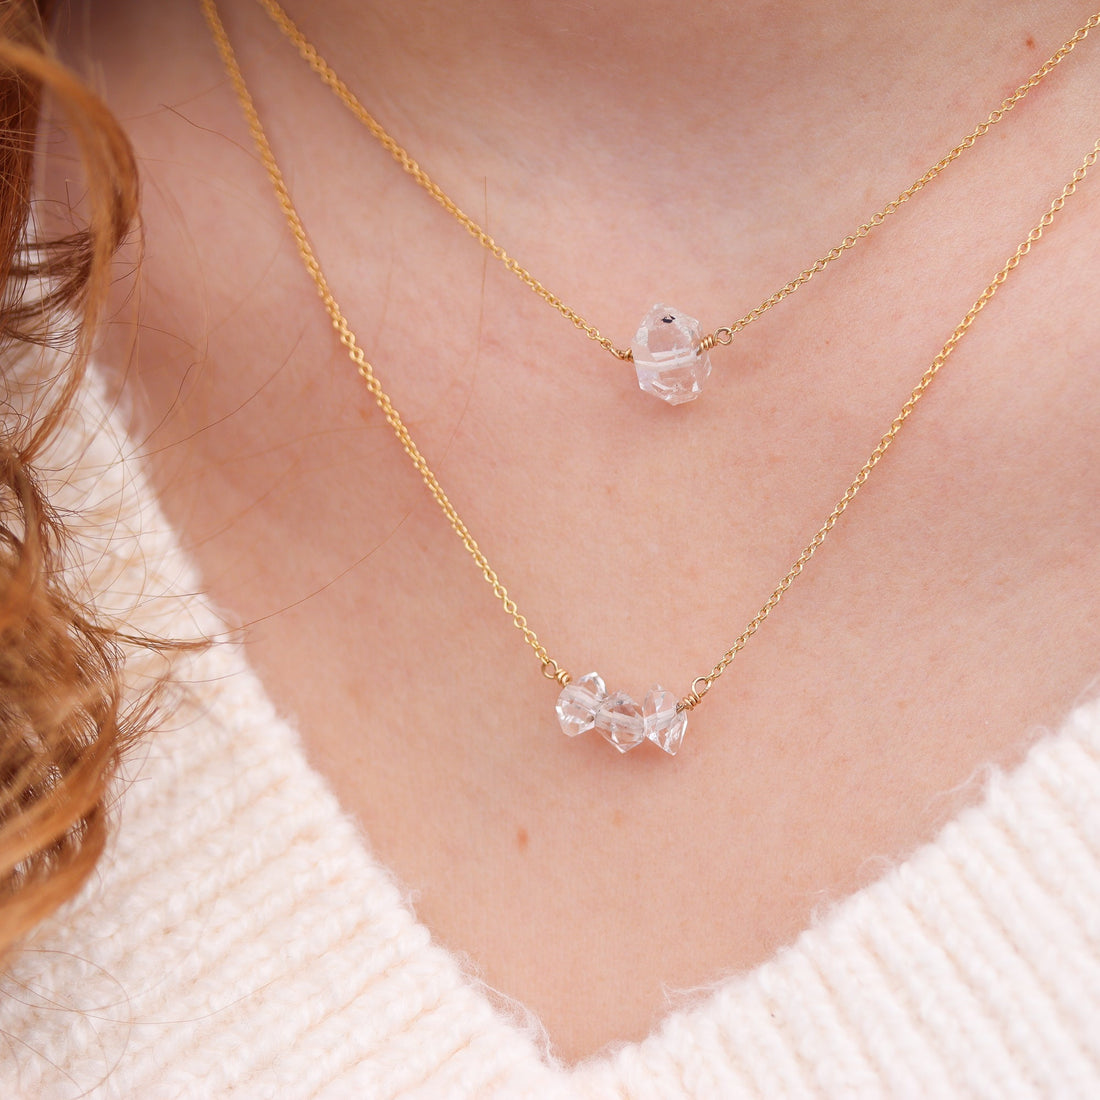 Herkimer Solitaire Necklace